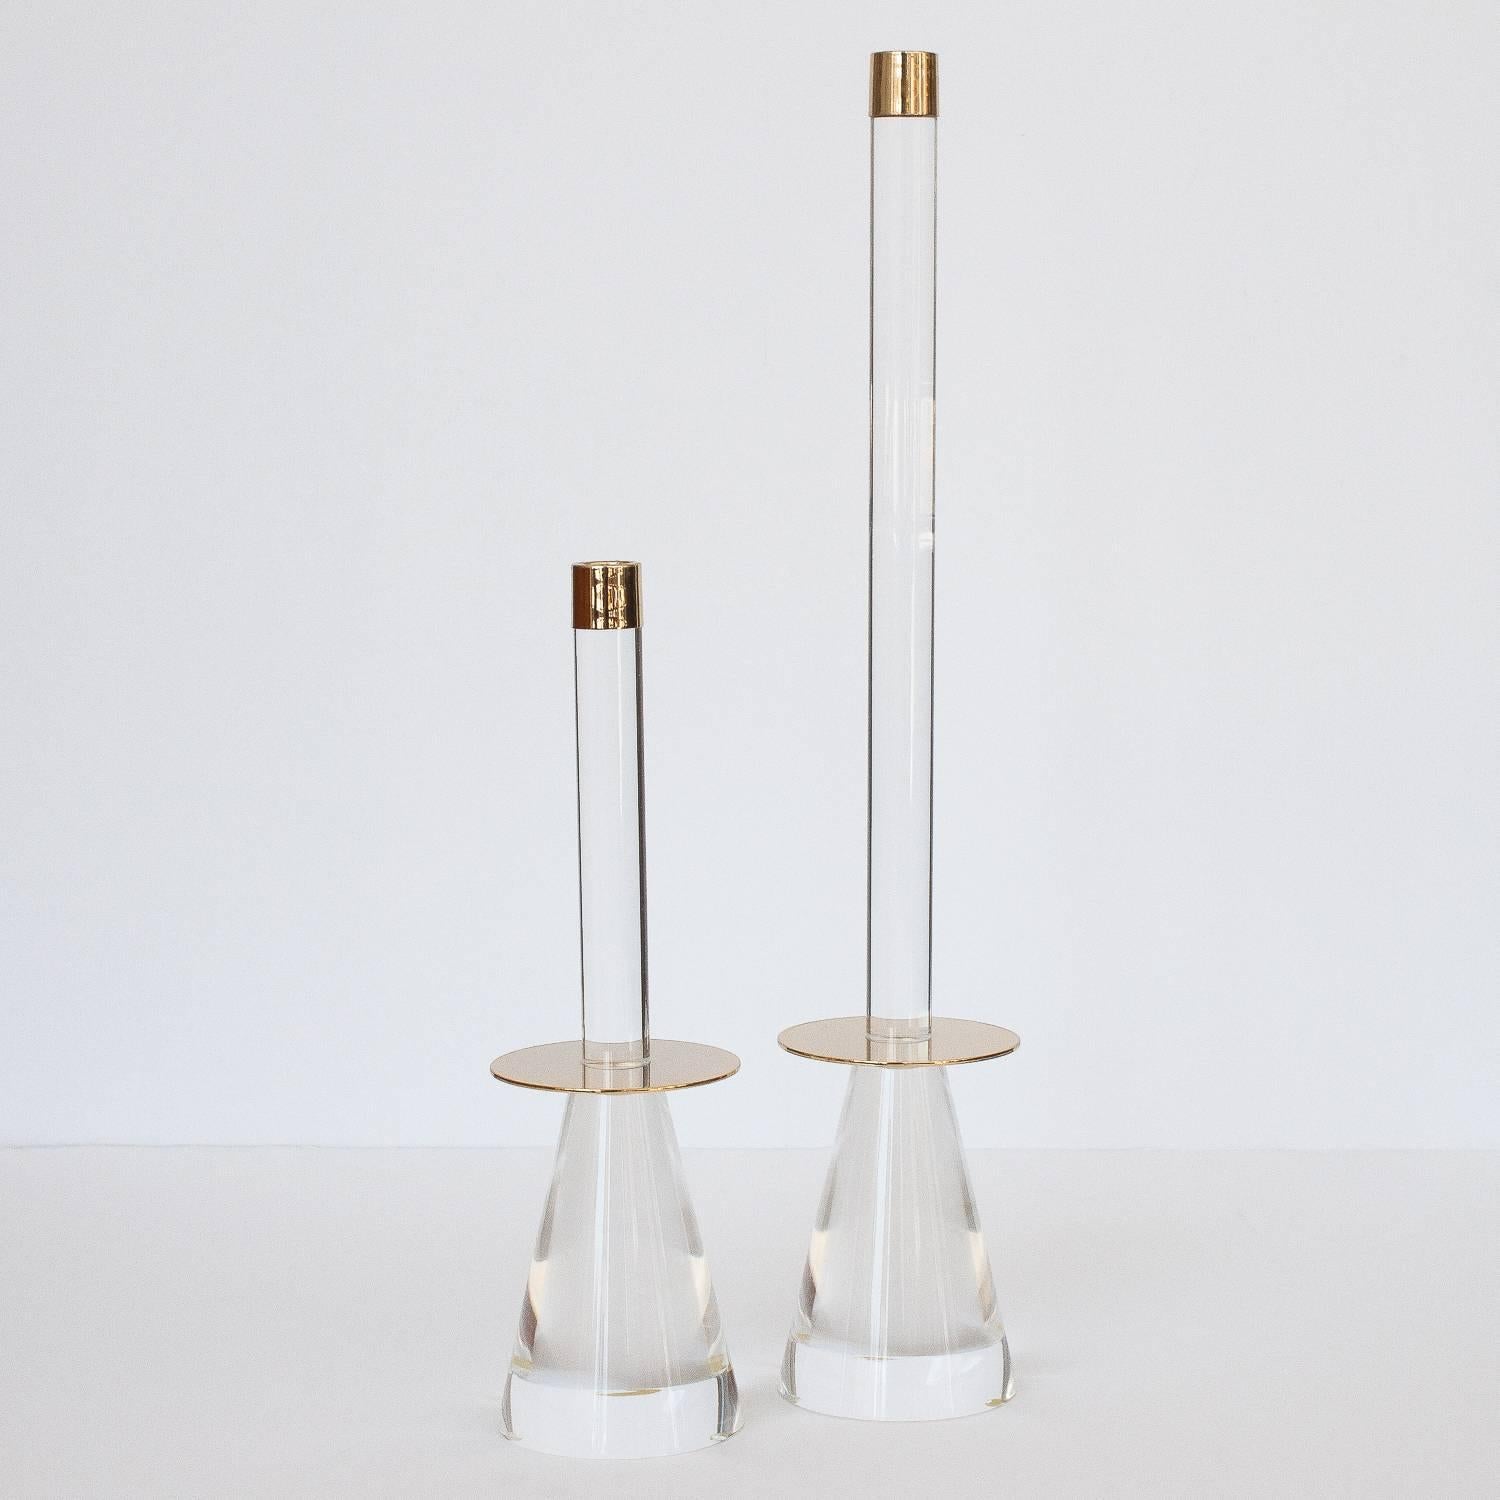 Pair of Lucite and brass candlesticks. Solid Lucite conical bases and stems. Polish brass discs separate the base and stem. Brass caps. Unmarked. 

Measures: Large 21.75" height x 4" diameter
Small 13.75" height x 4" diameter.